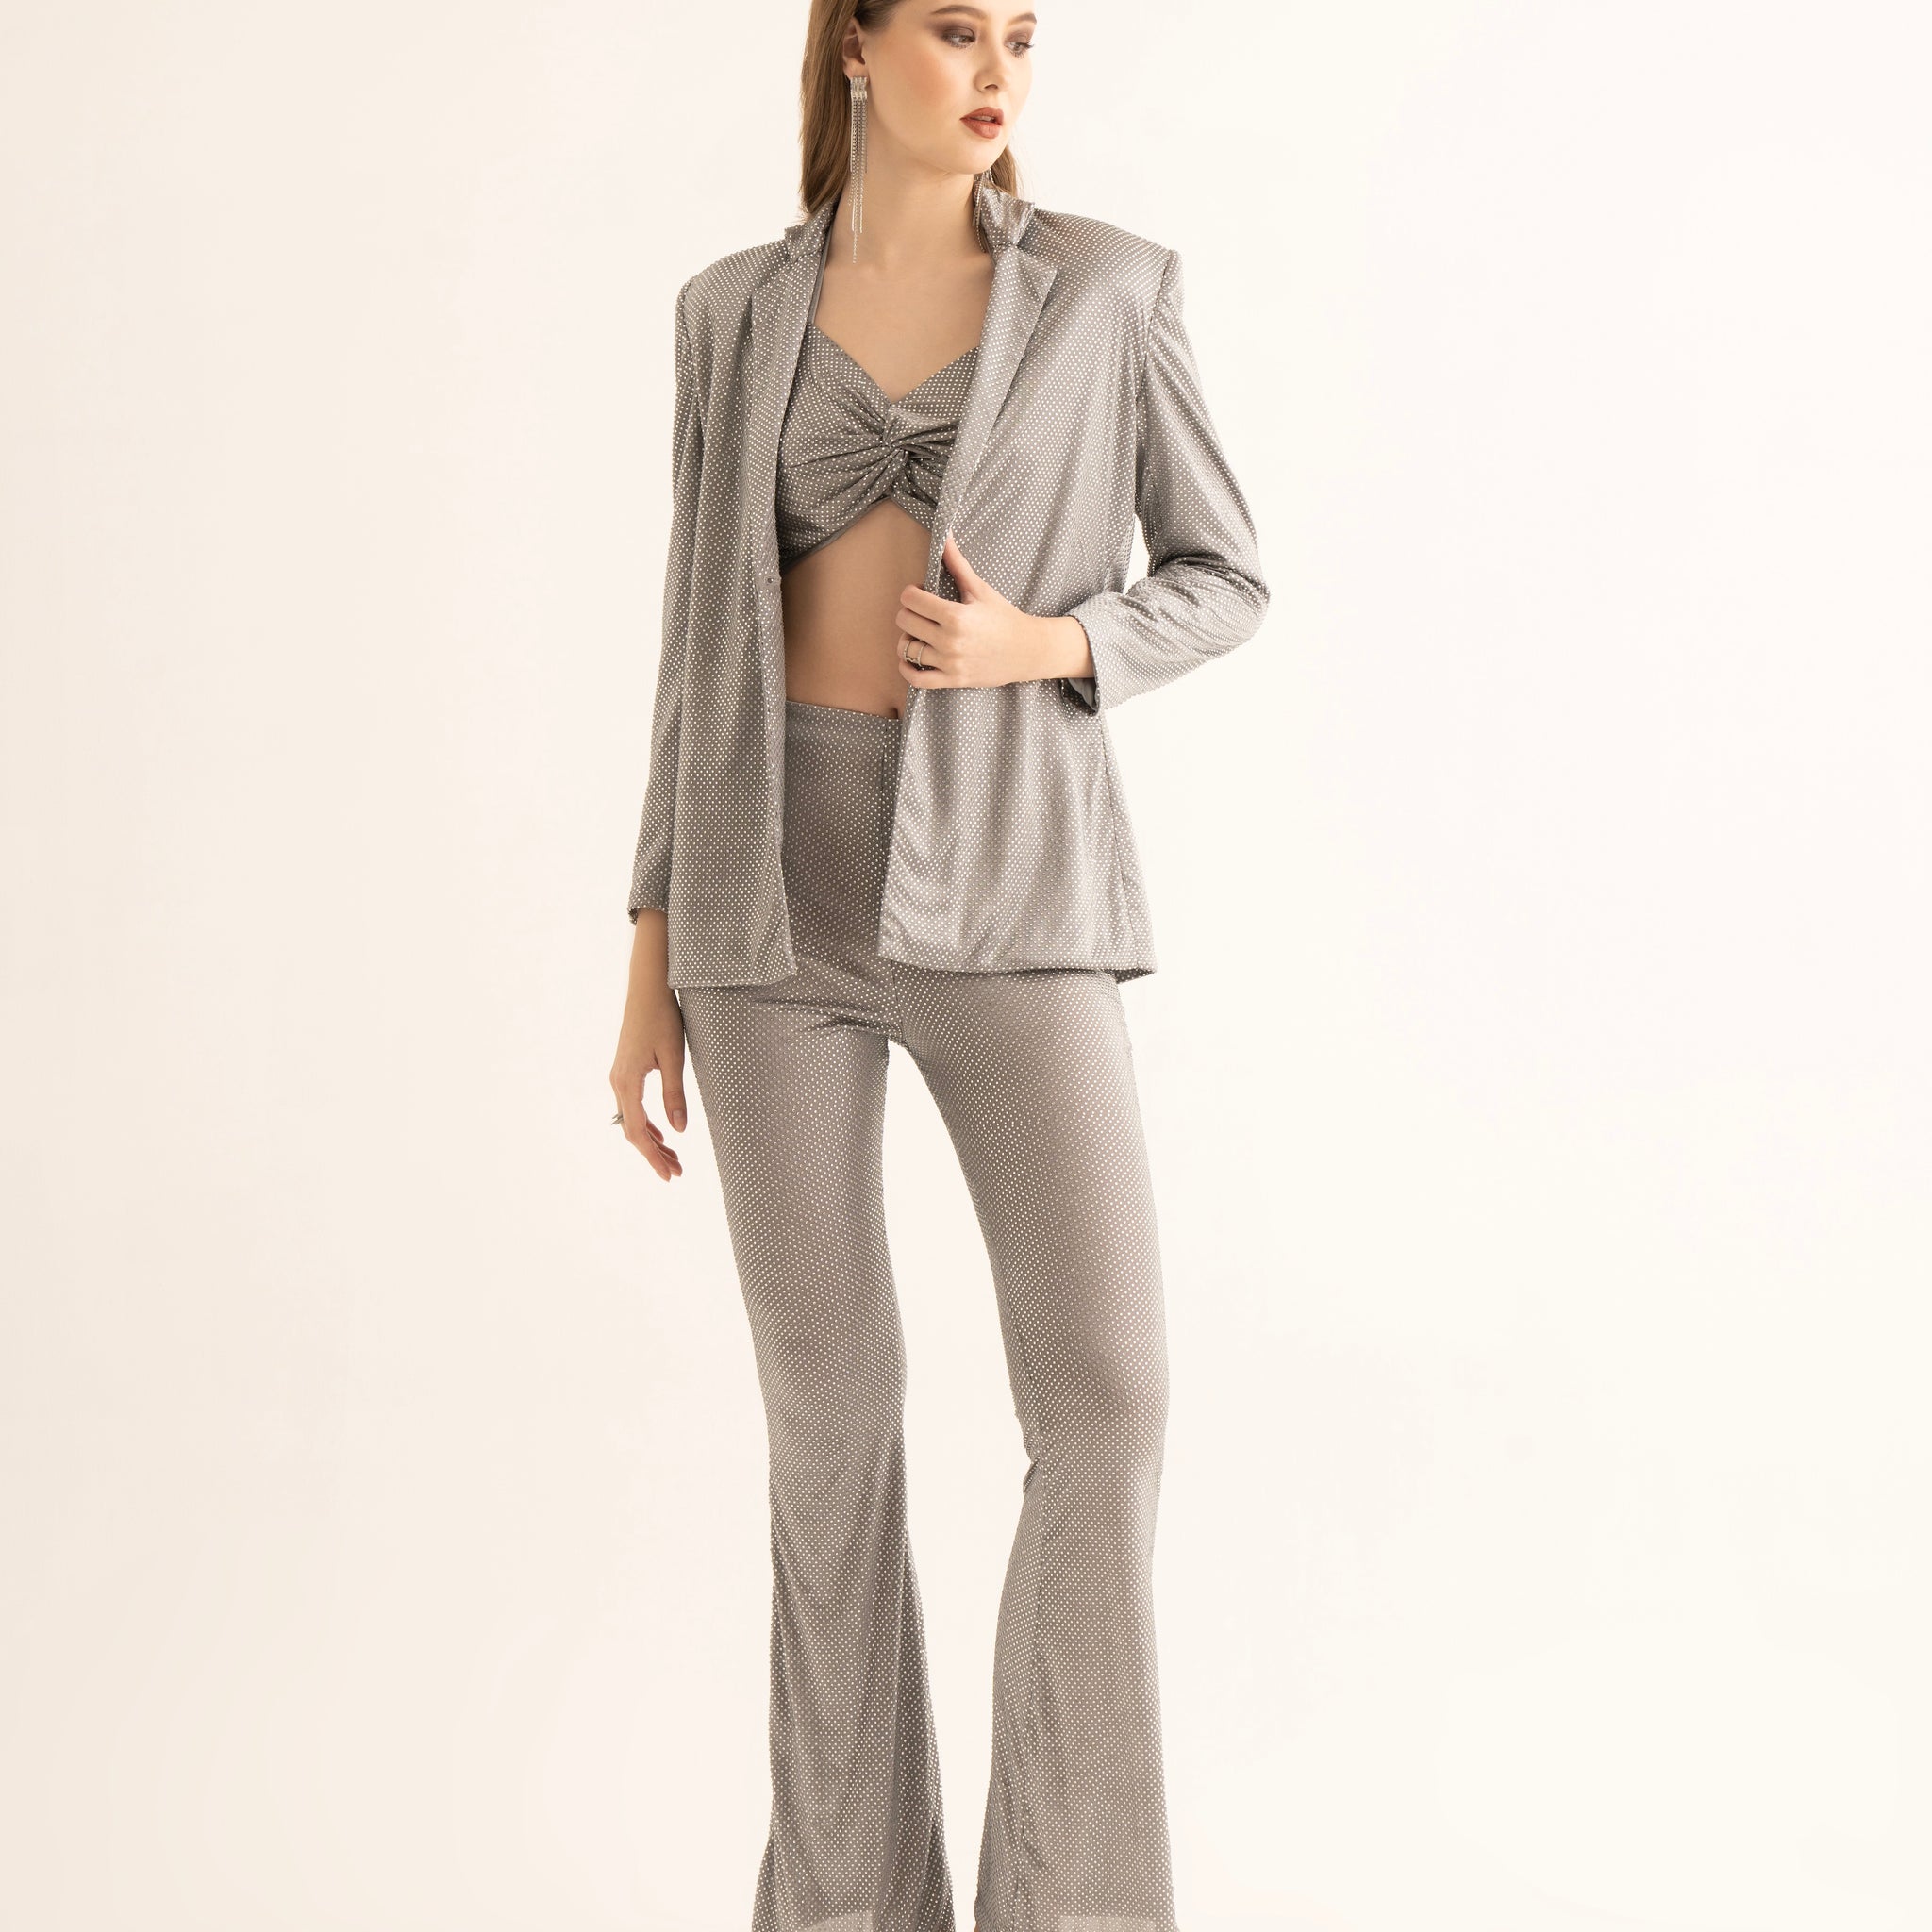 Silver Rhinestone Blazer and Bell Bottoms Co-ord Set